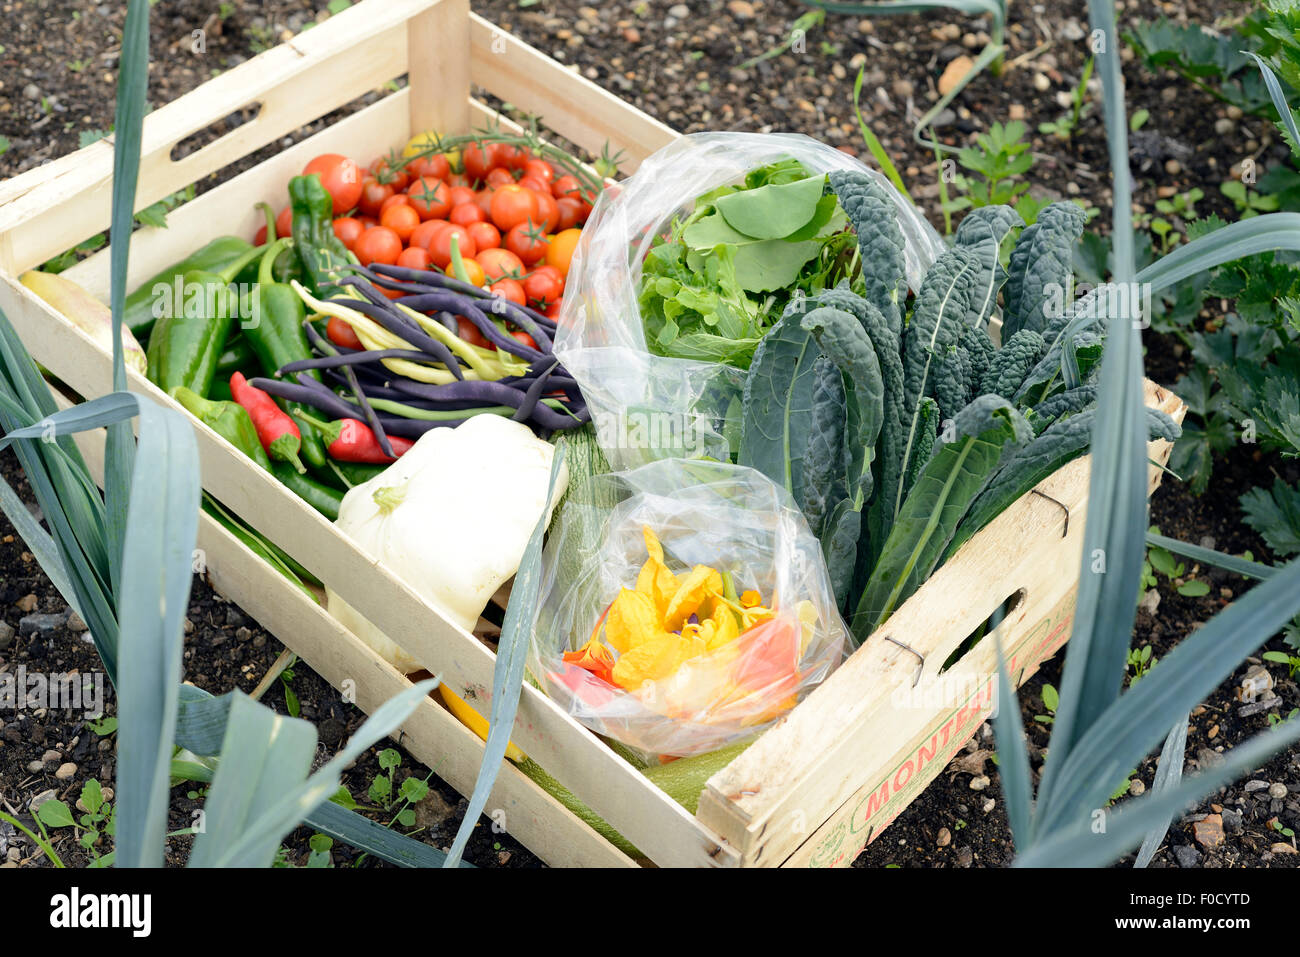 Hand picked organic vegetable from Dagenham farm in a wooden box Stock Photo